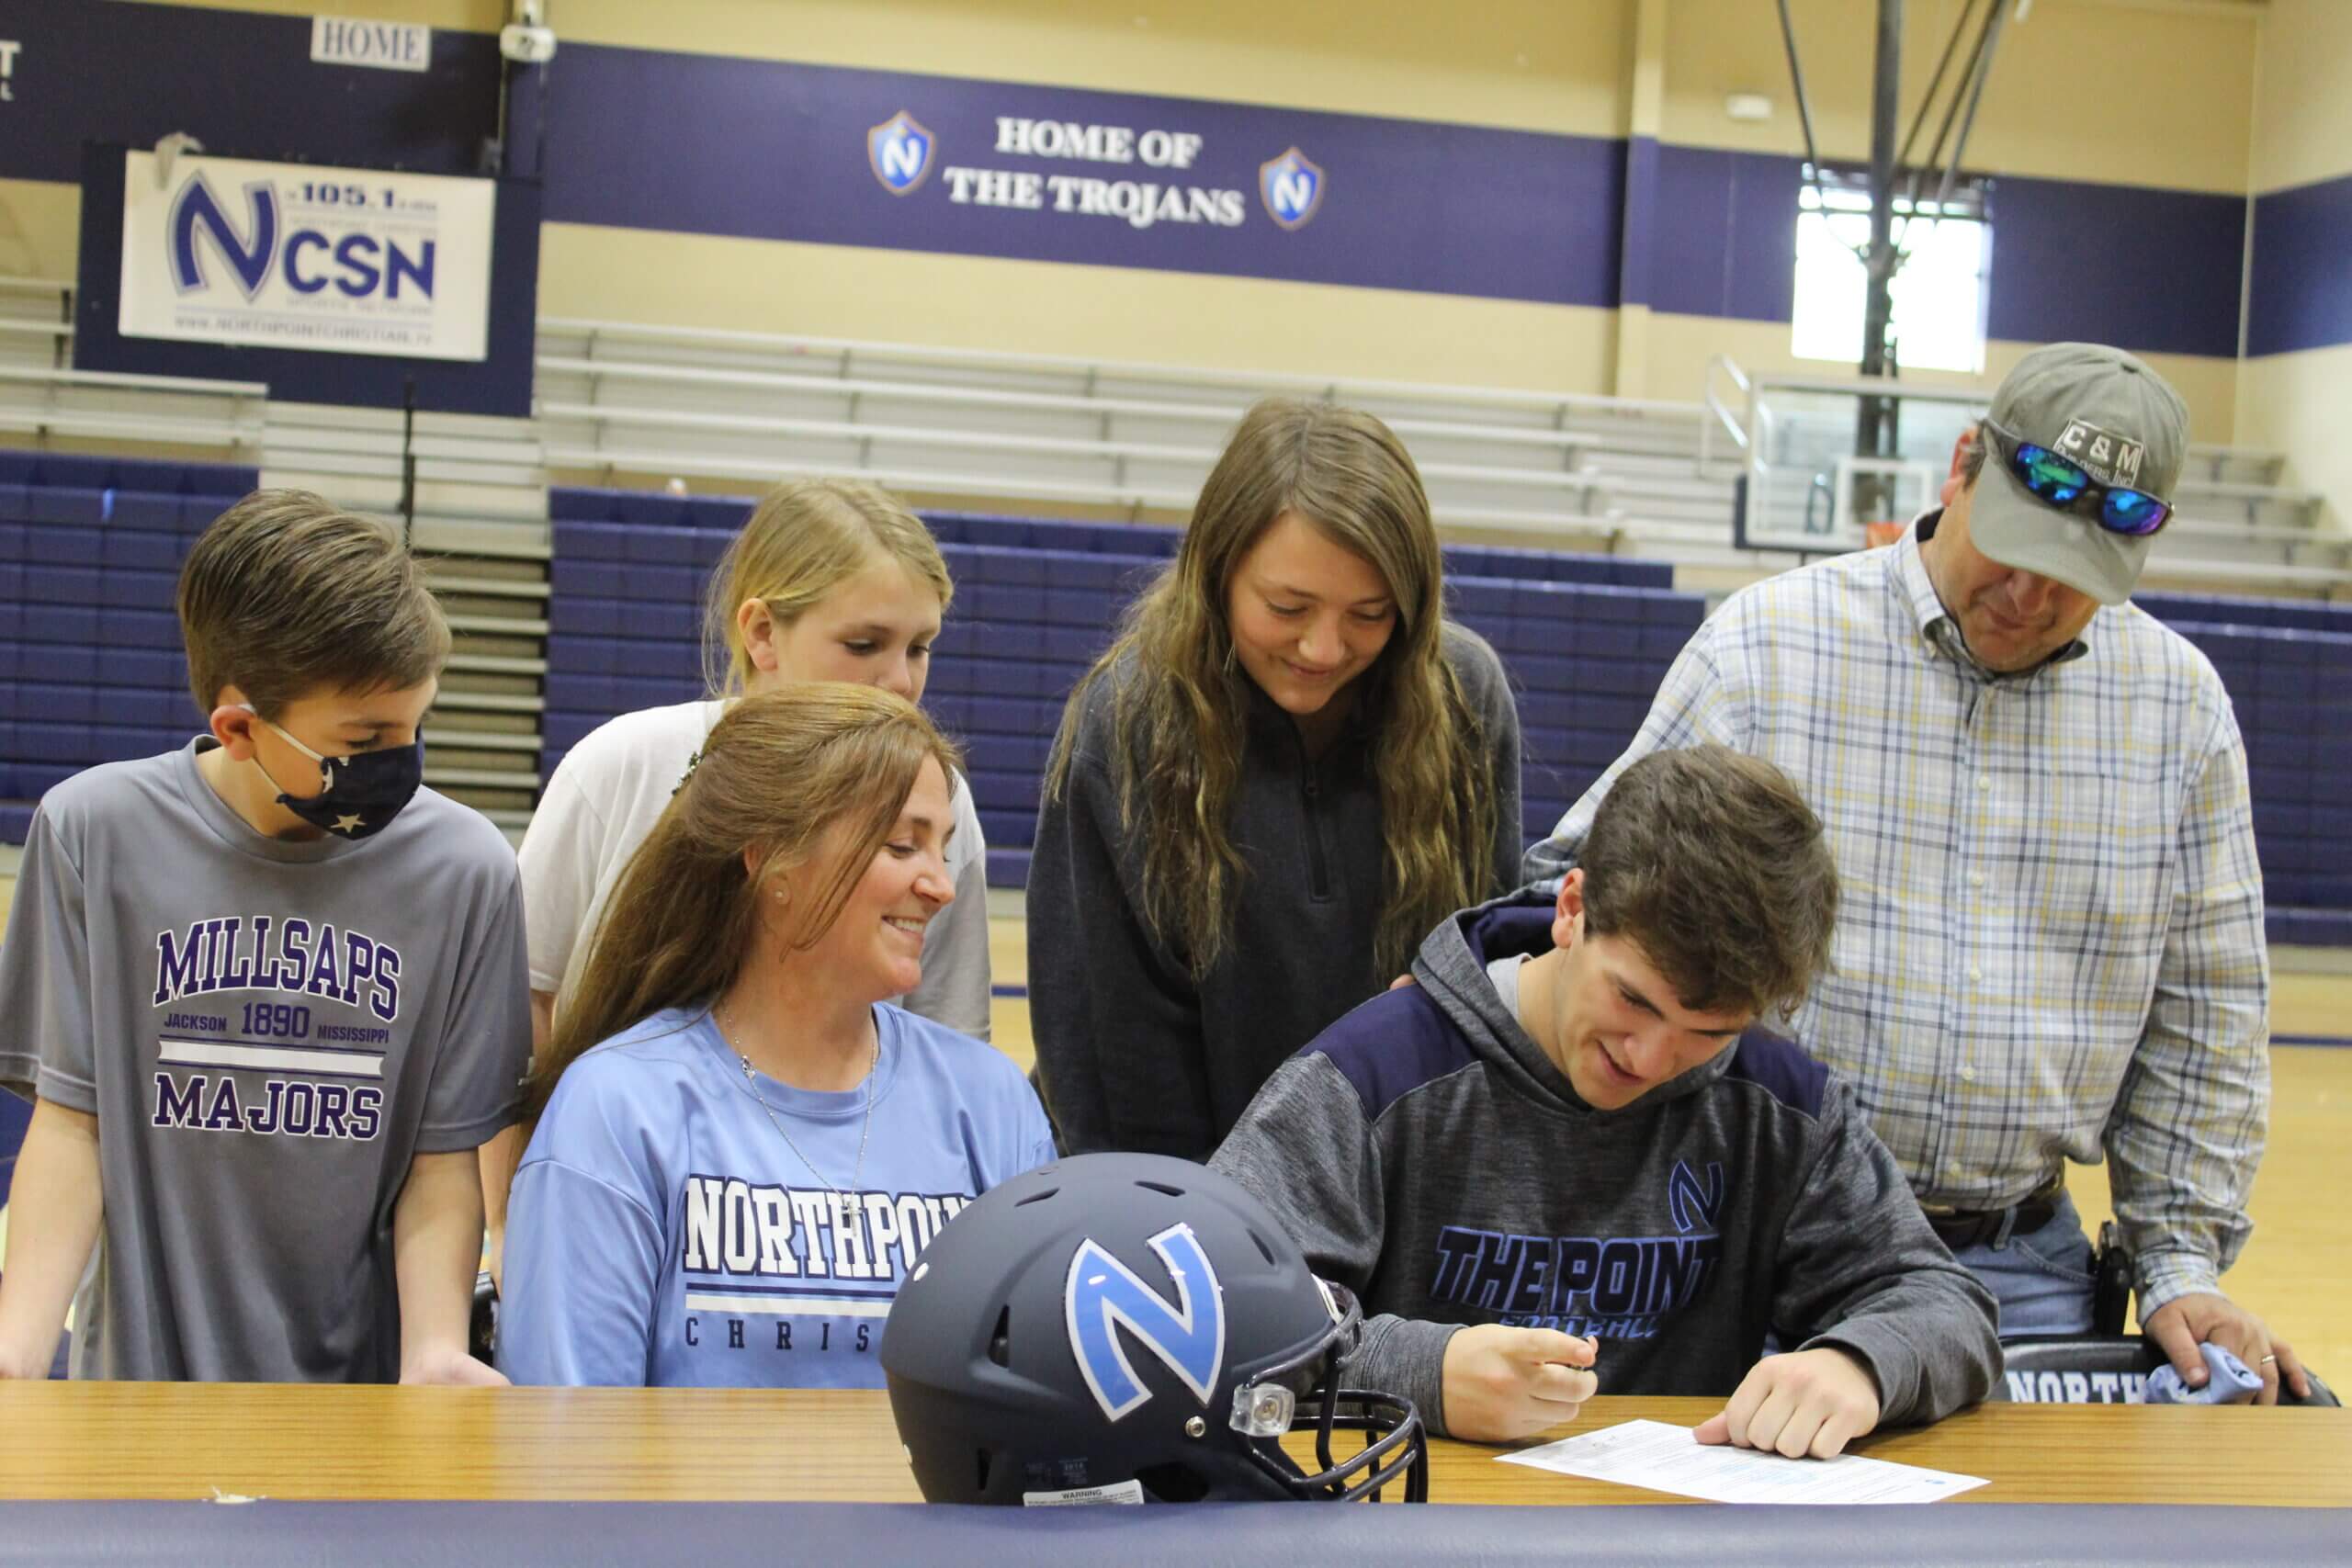 Northpoint's Smith leads his way to college football